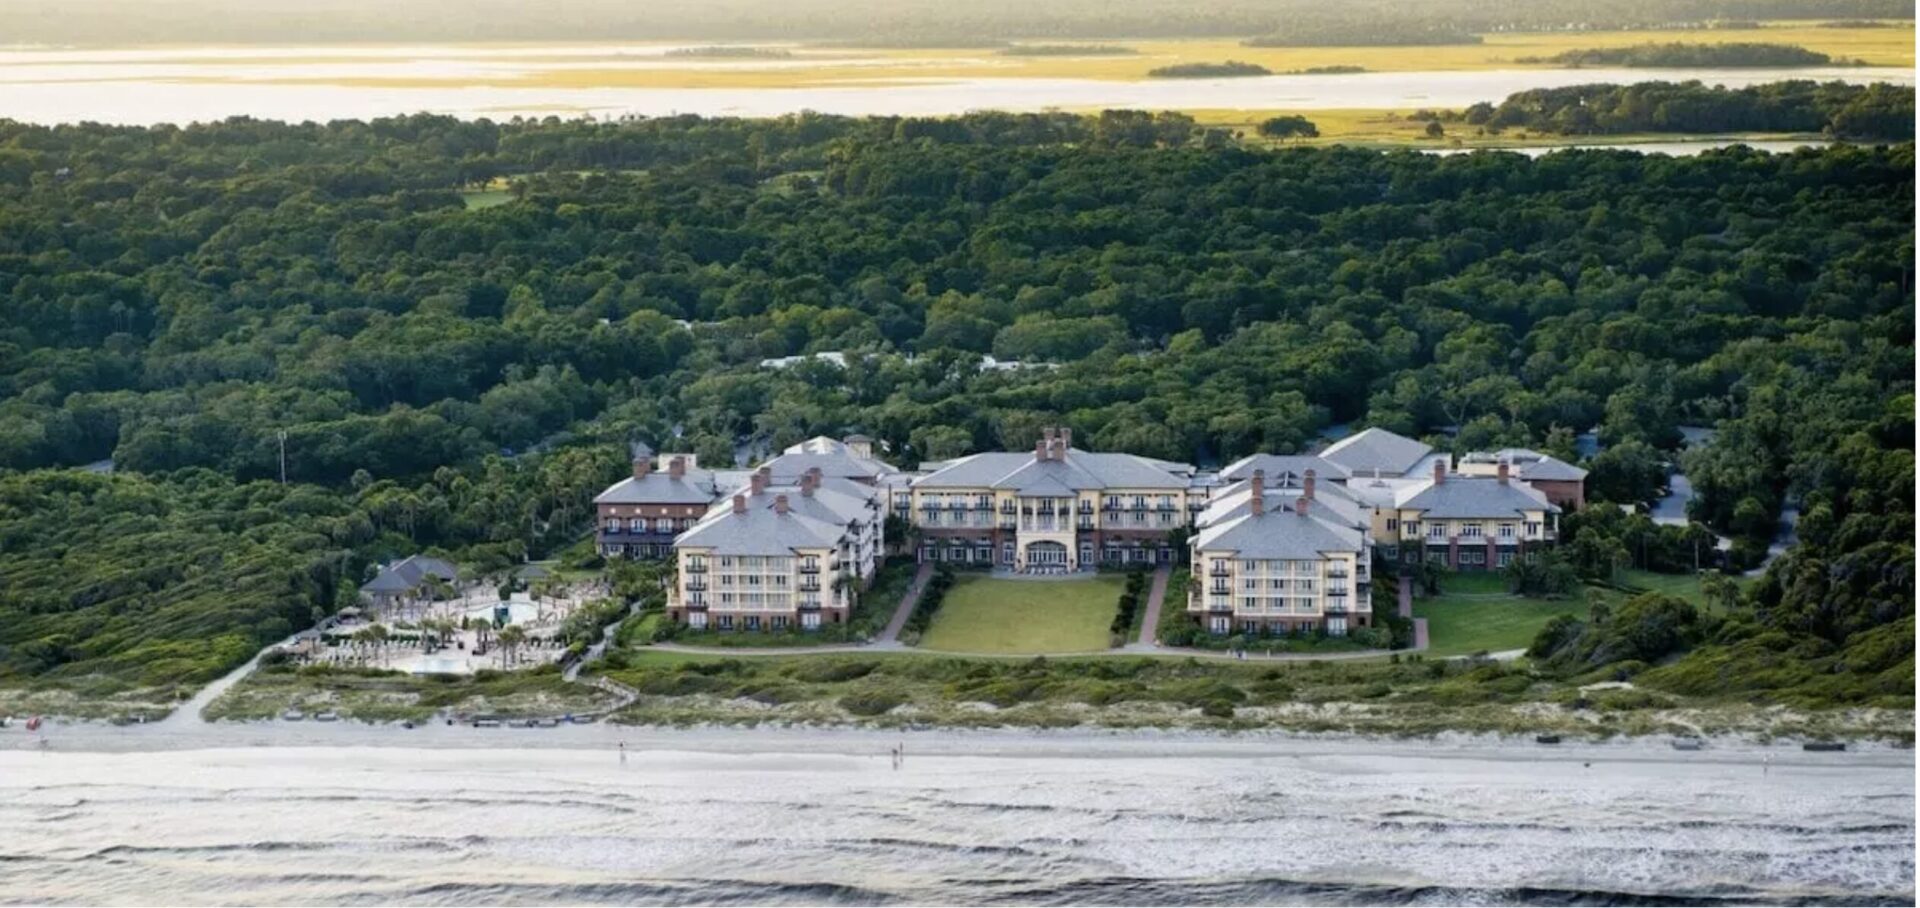 aerial view of The Sanctuary at Kiawah Island